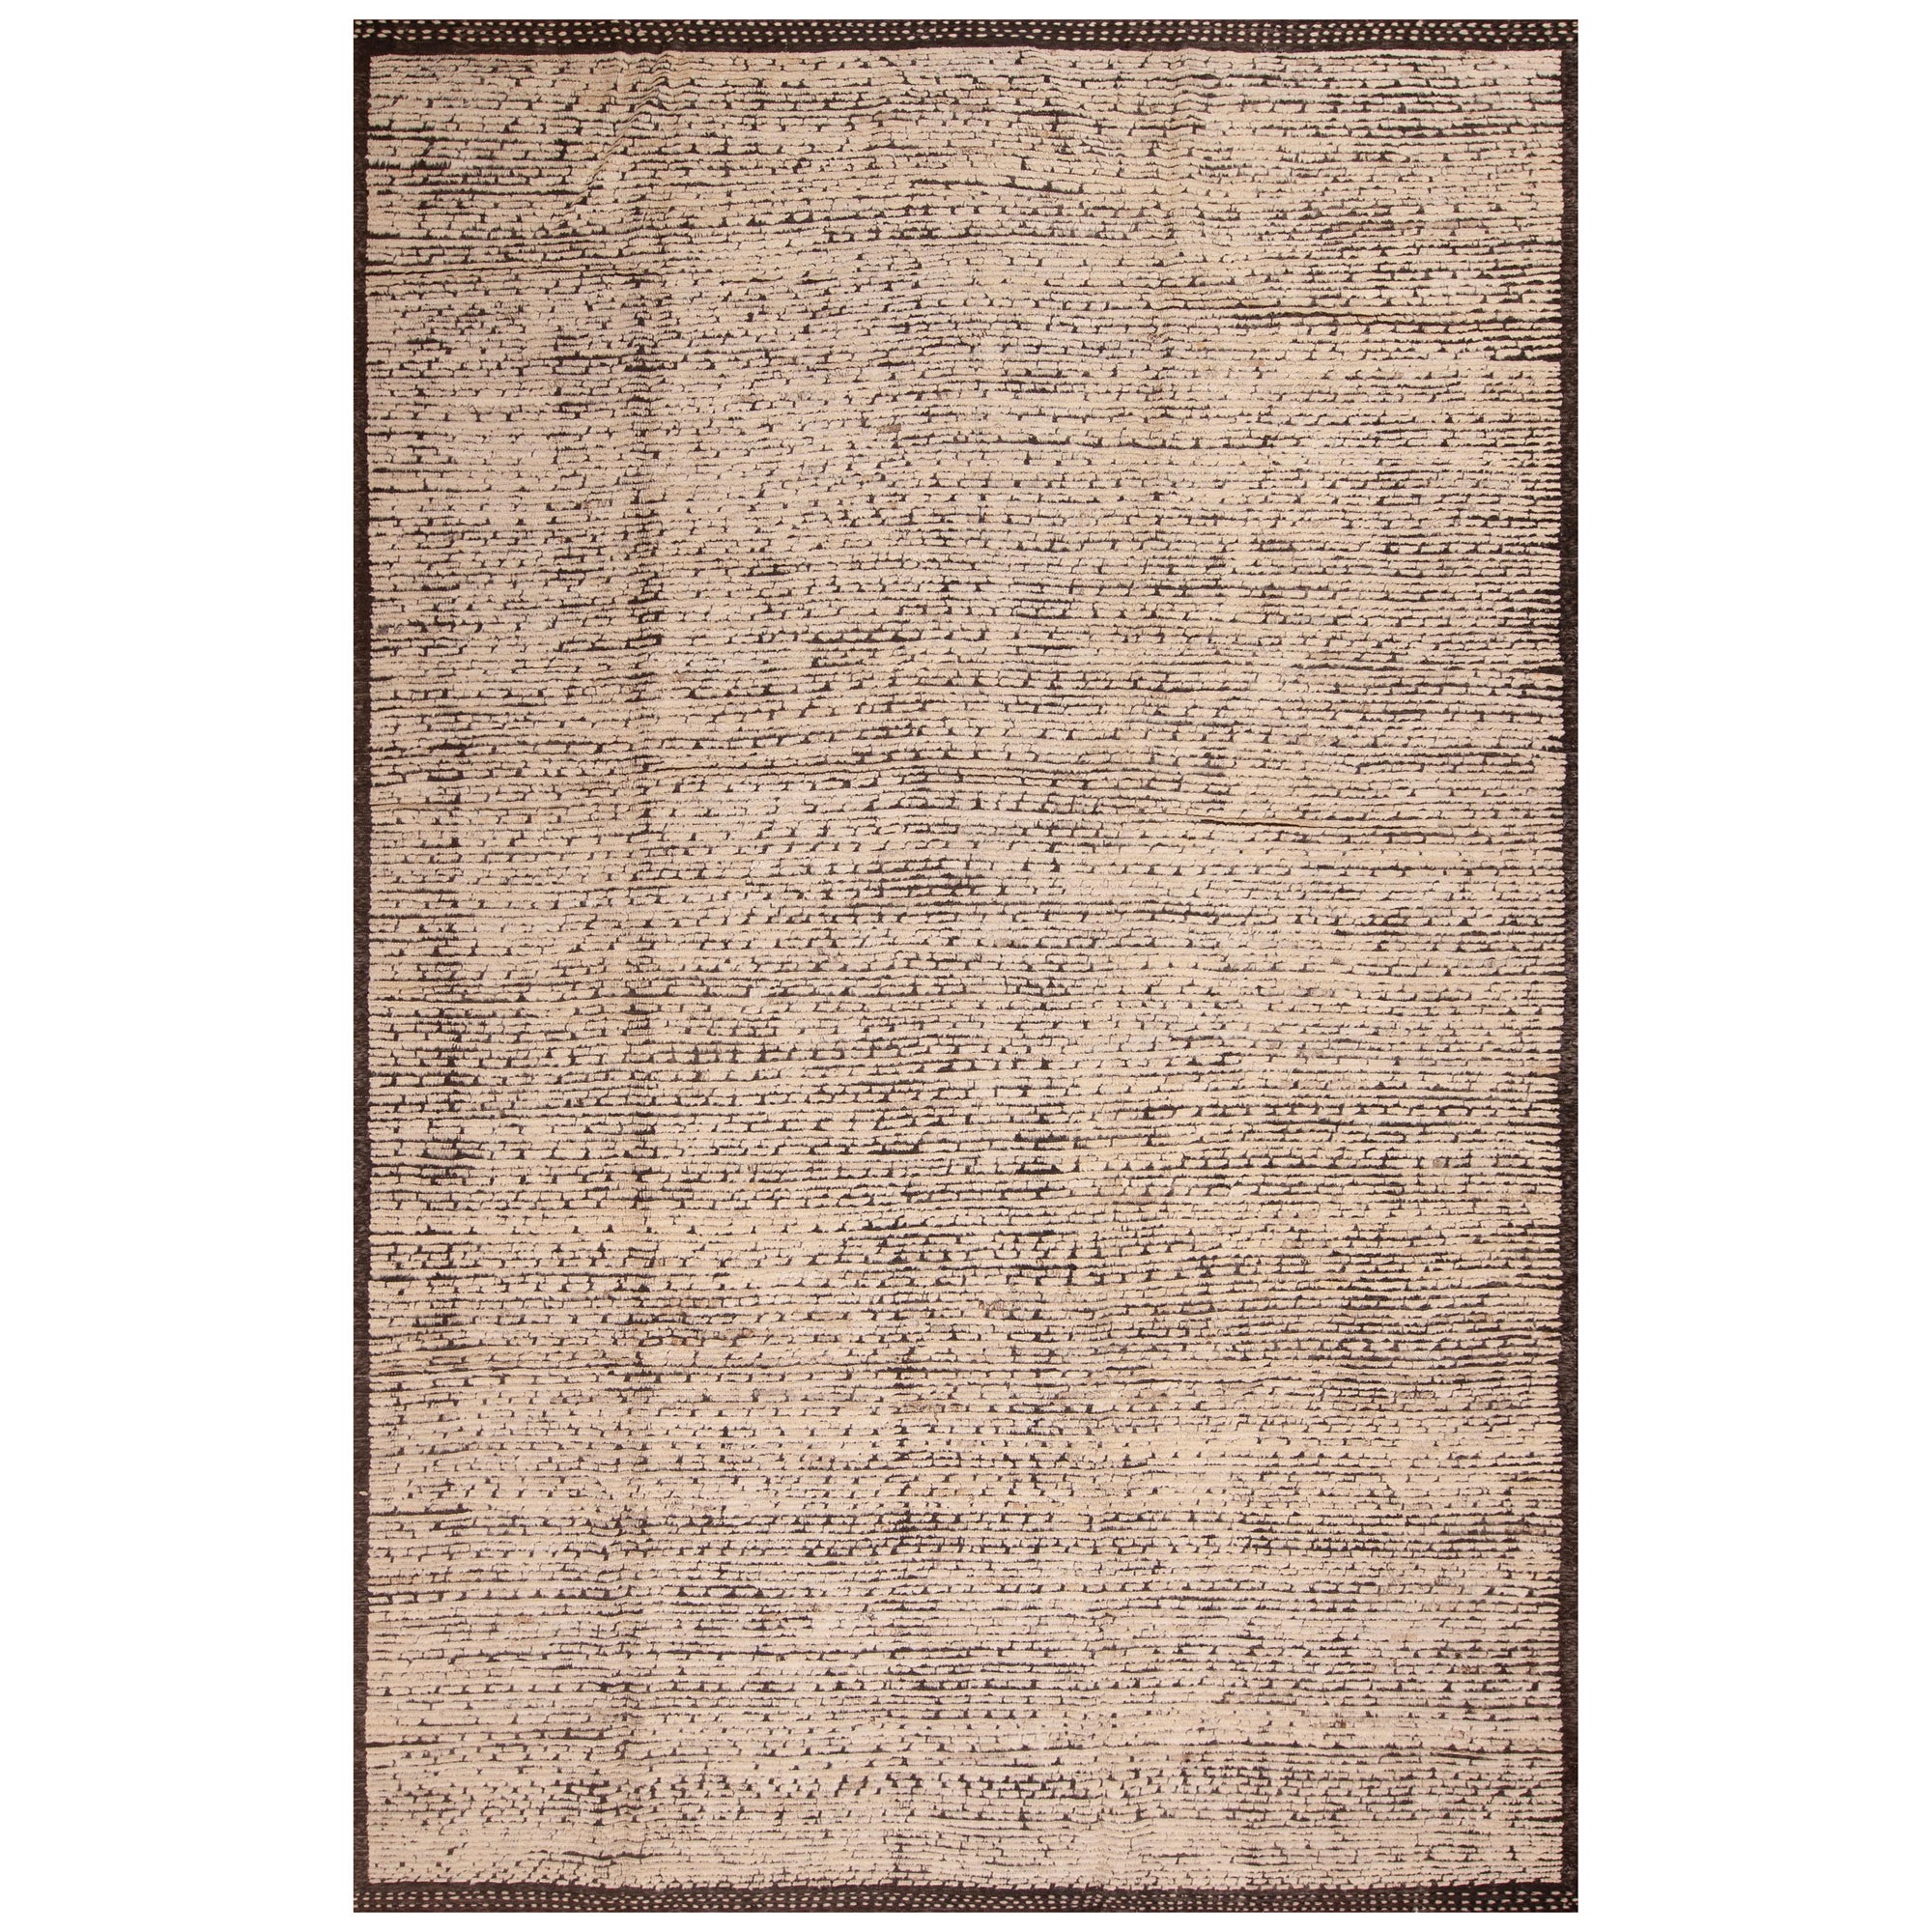 Nazmiyal Collection Artistic Speckled Pattern Modern Room Size Rug 8'6" x 13'2"